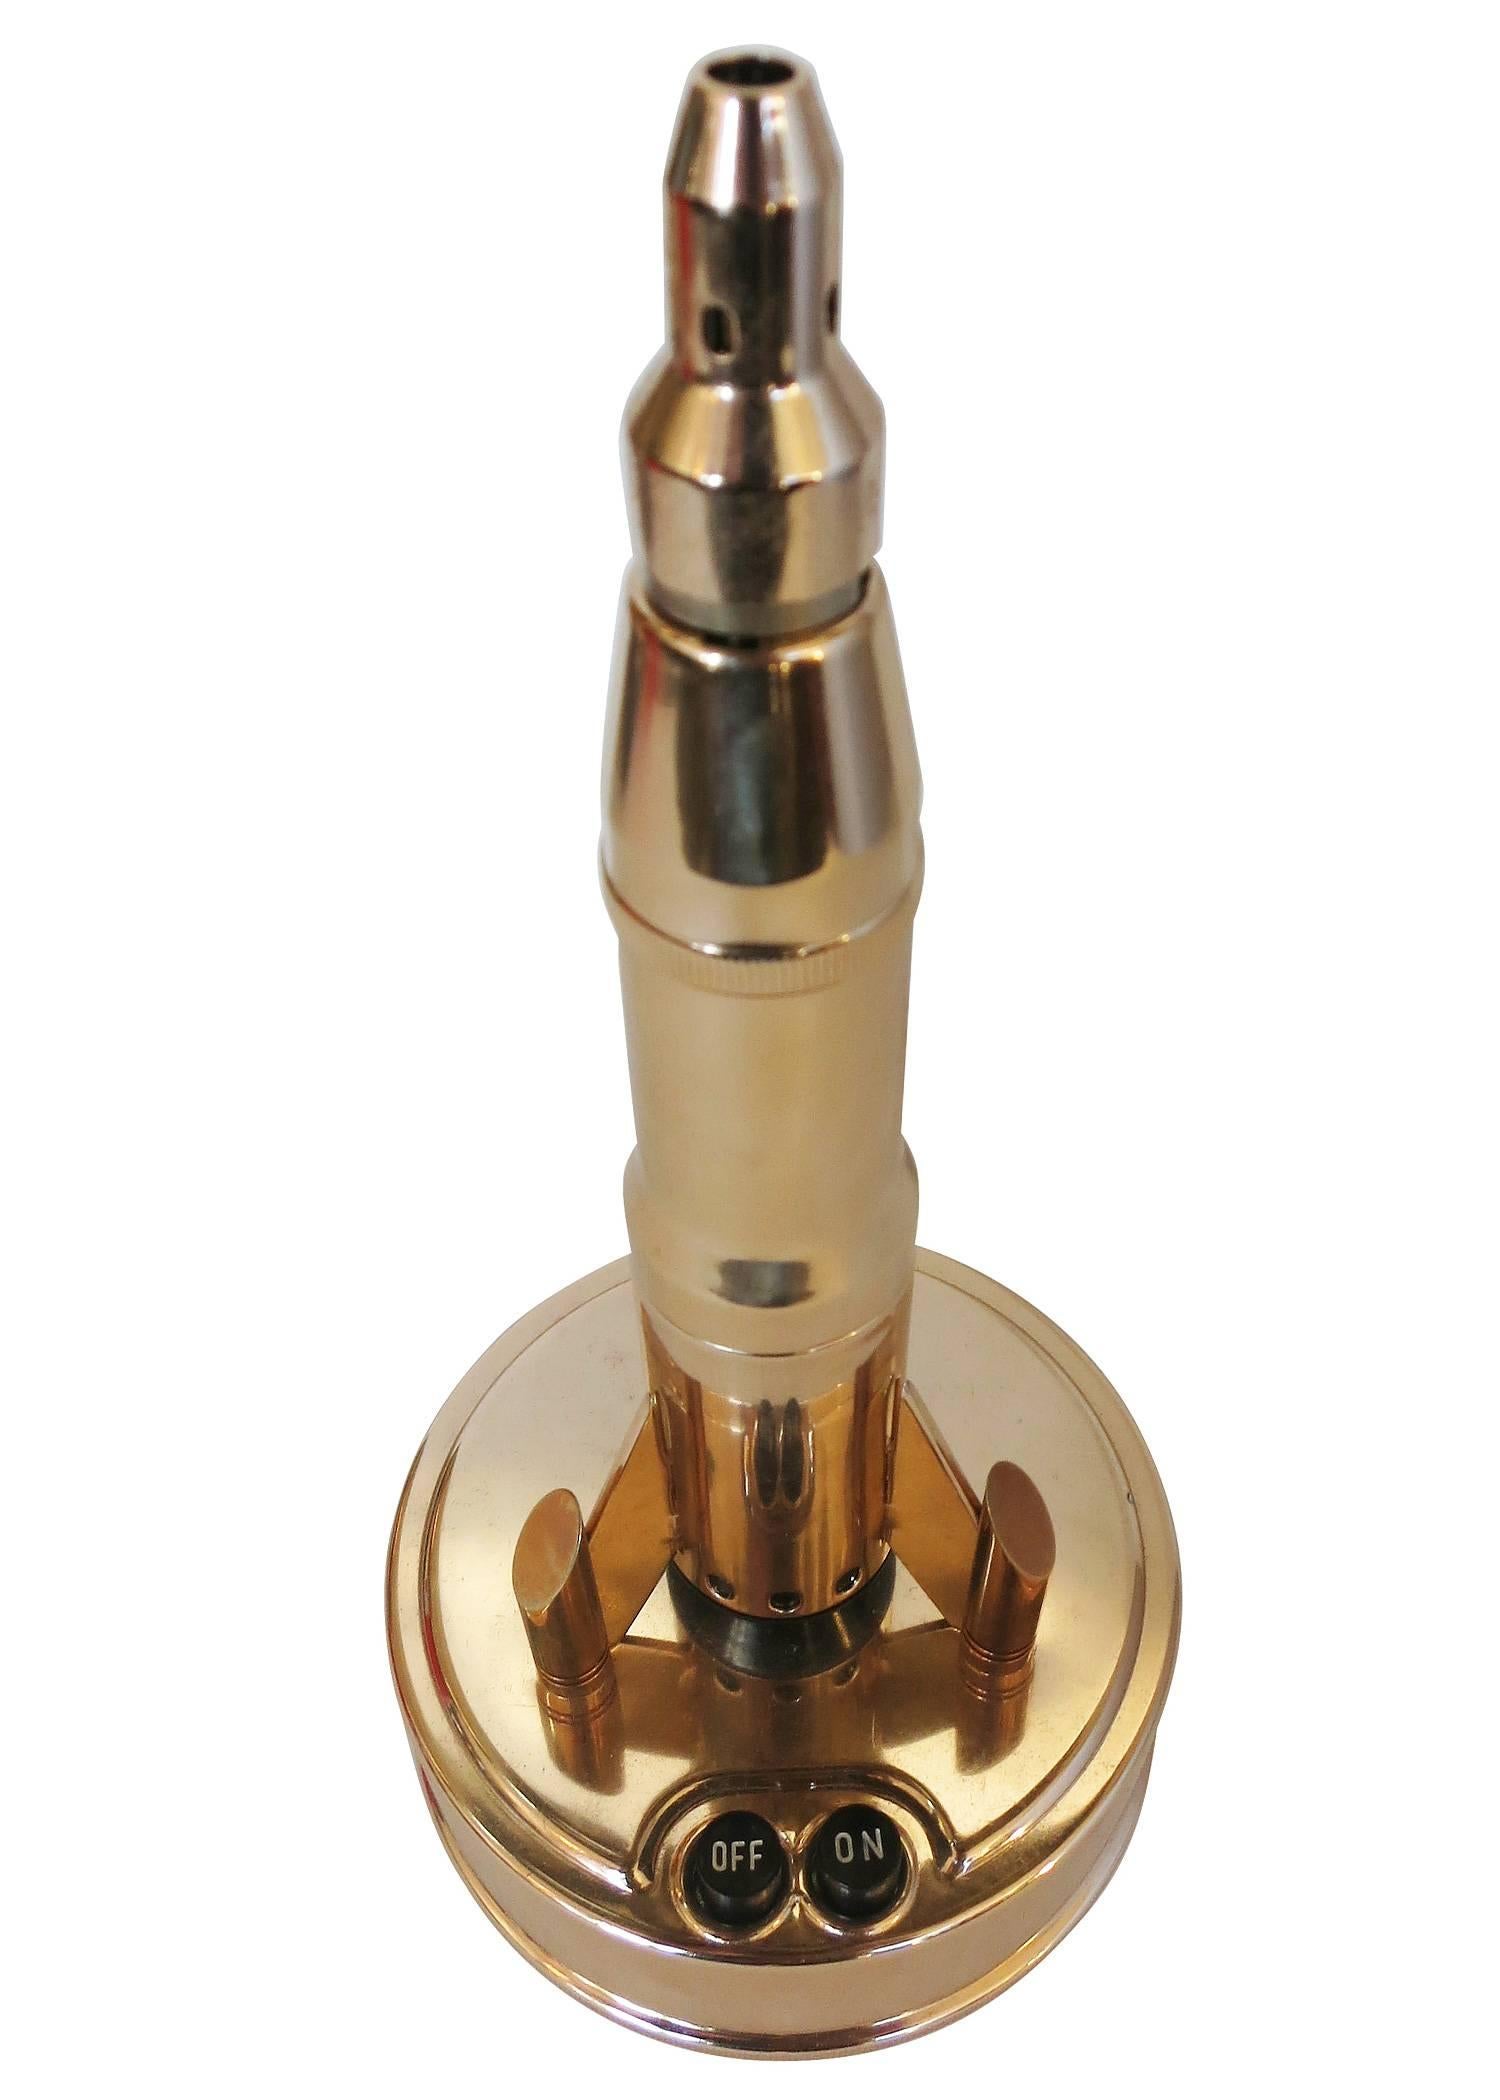 Mid Century brass rocket ship electric butane table lighter by Bronica featuring a large 9' tall brass sculpture of which lights from the top of the lighter. 

Comes new in original display box with instruction manual.

Takes 2 C-cell batteries